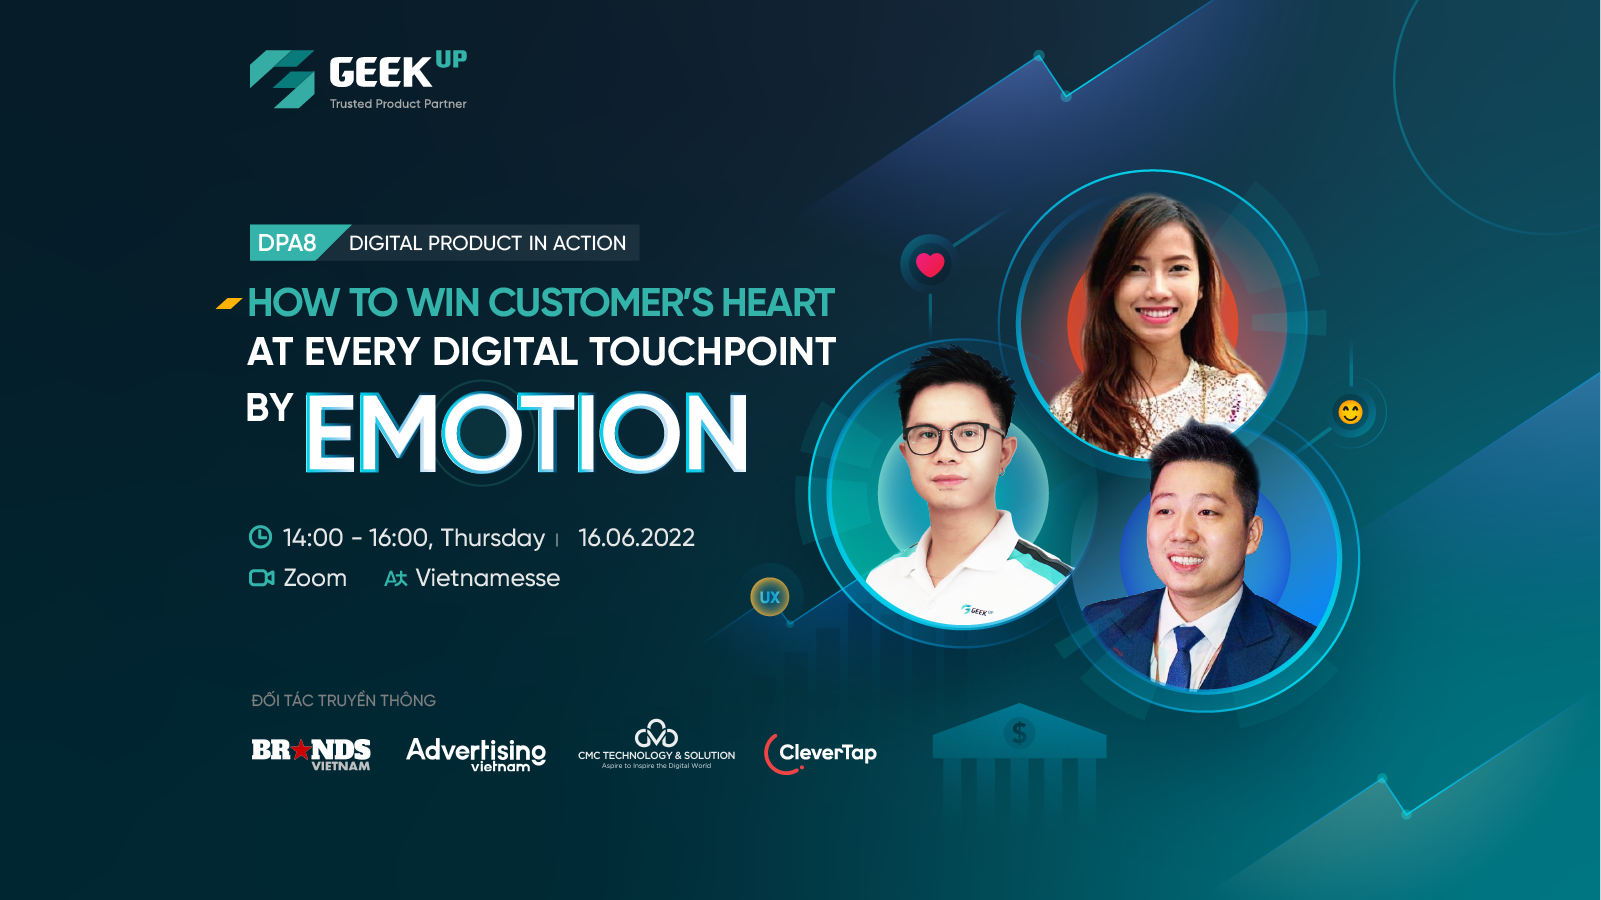 Re-live GEEK Up DPA 8: Finding solutions for balancing technology and emotions for Digital Banking